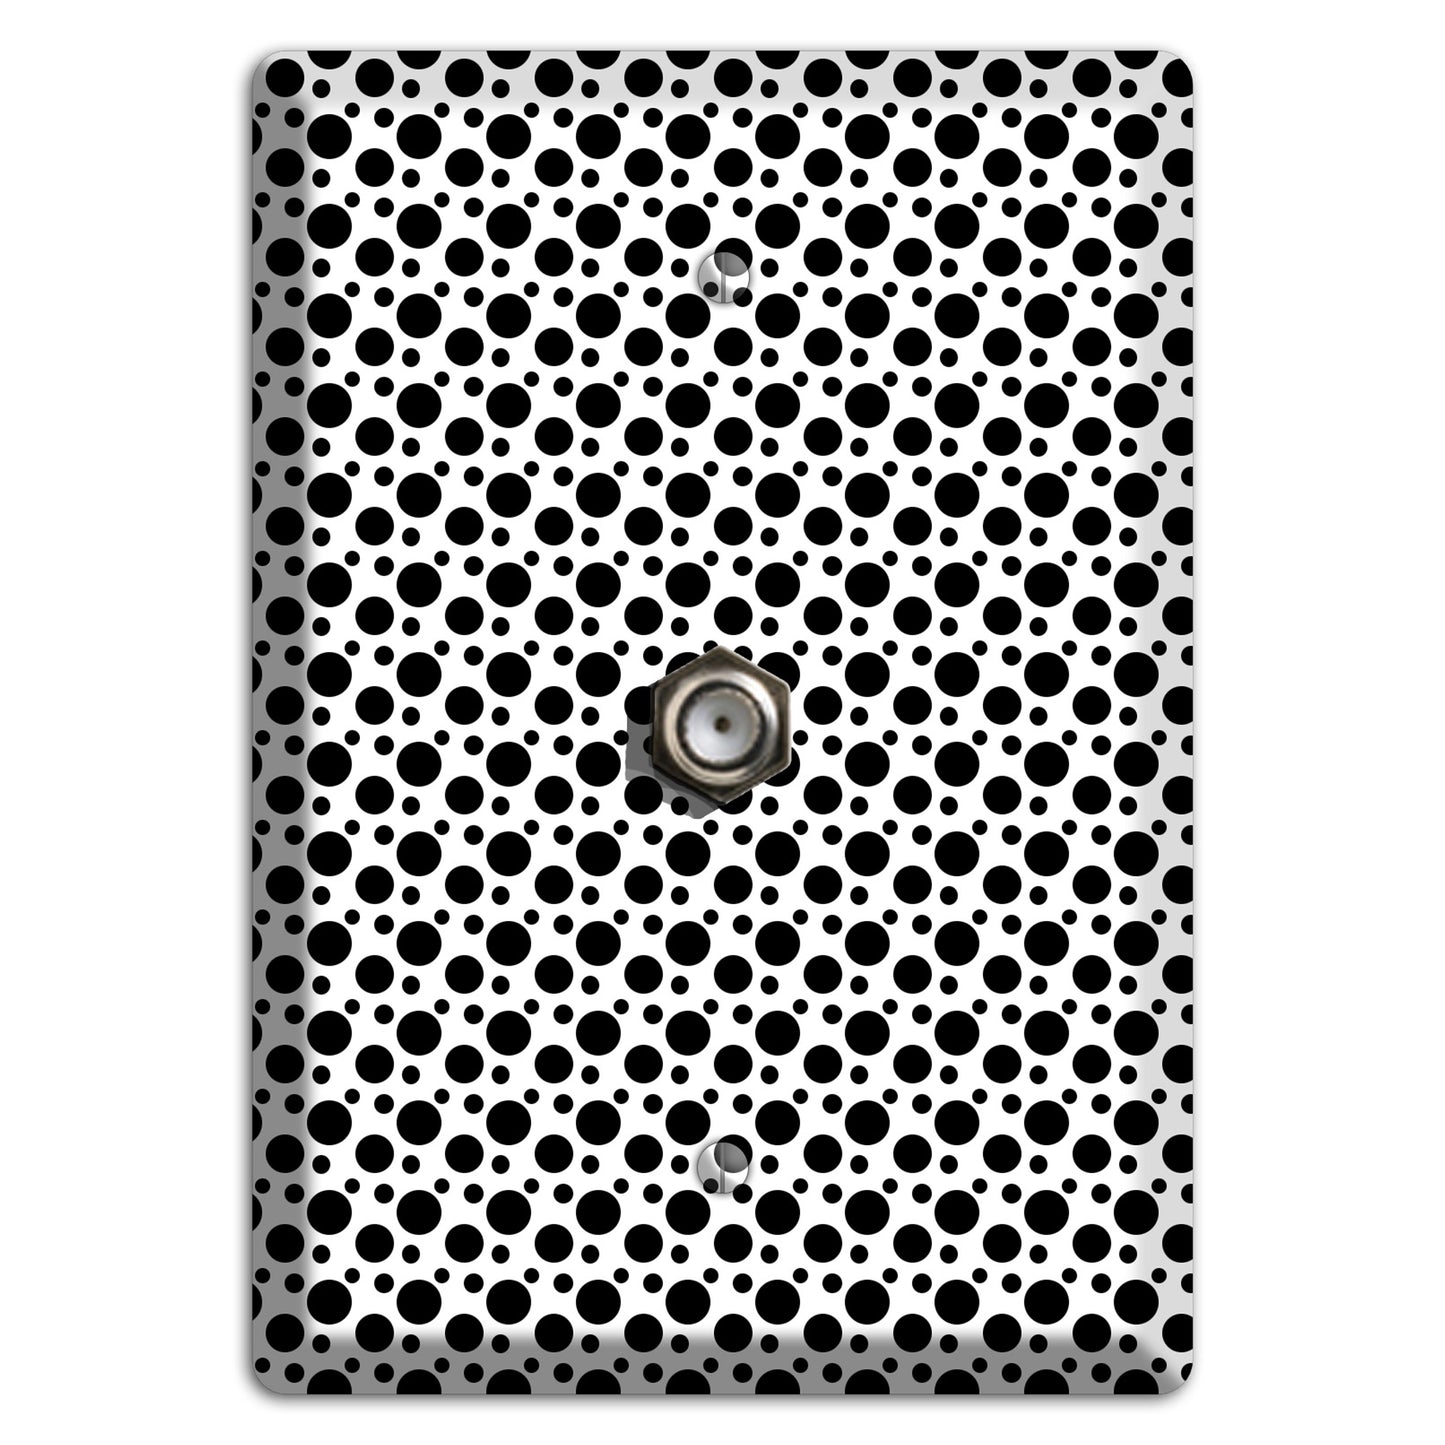 White with Black Small and Tiny Polka Dots Cable Wallplate